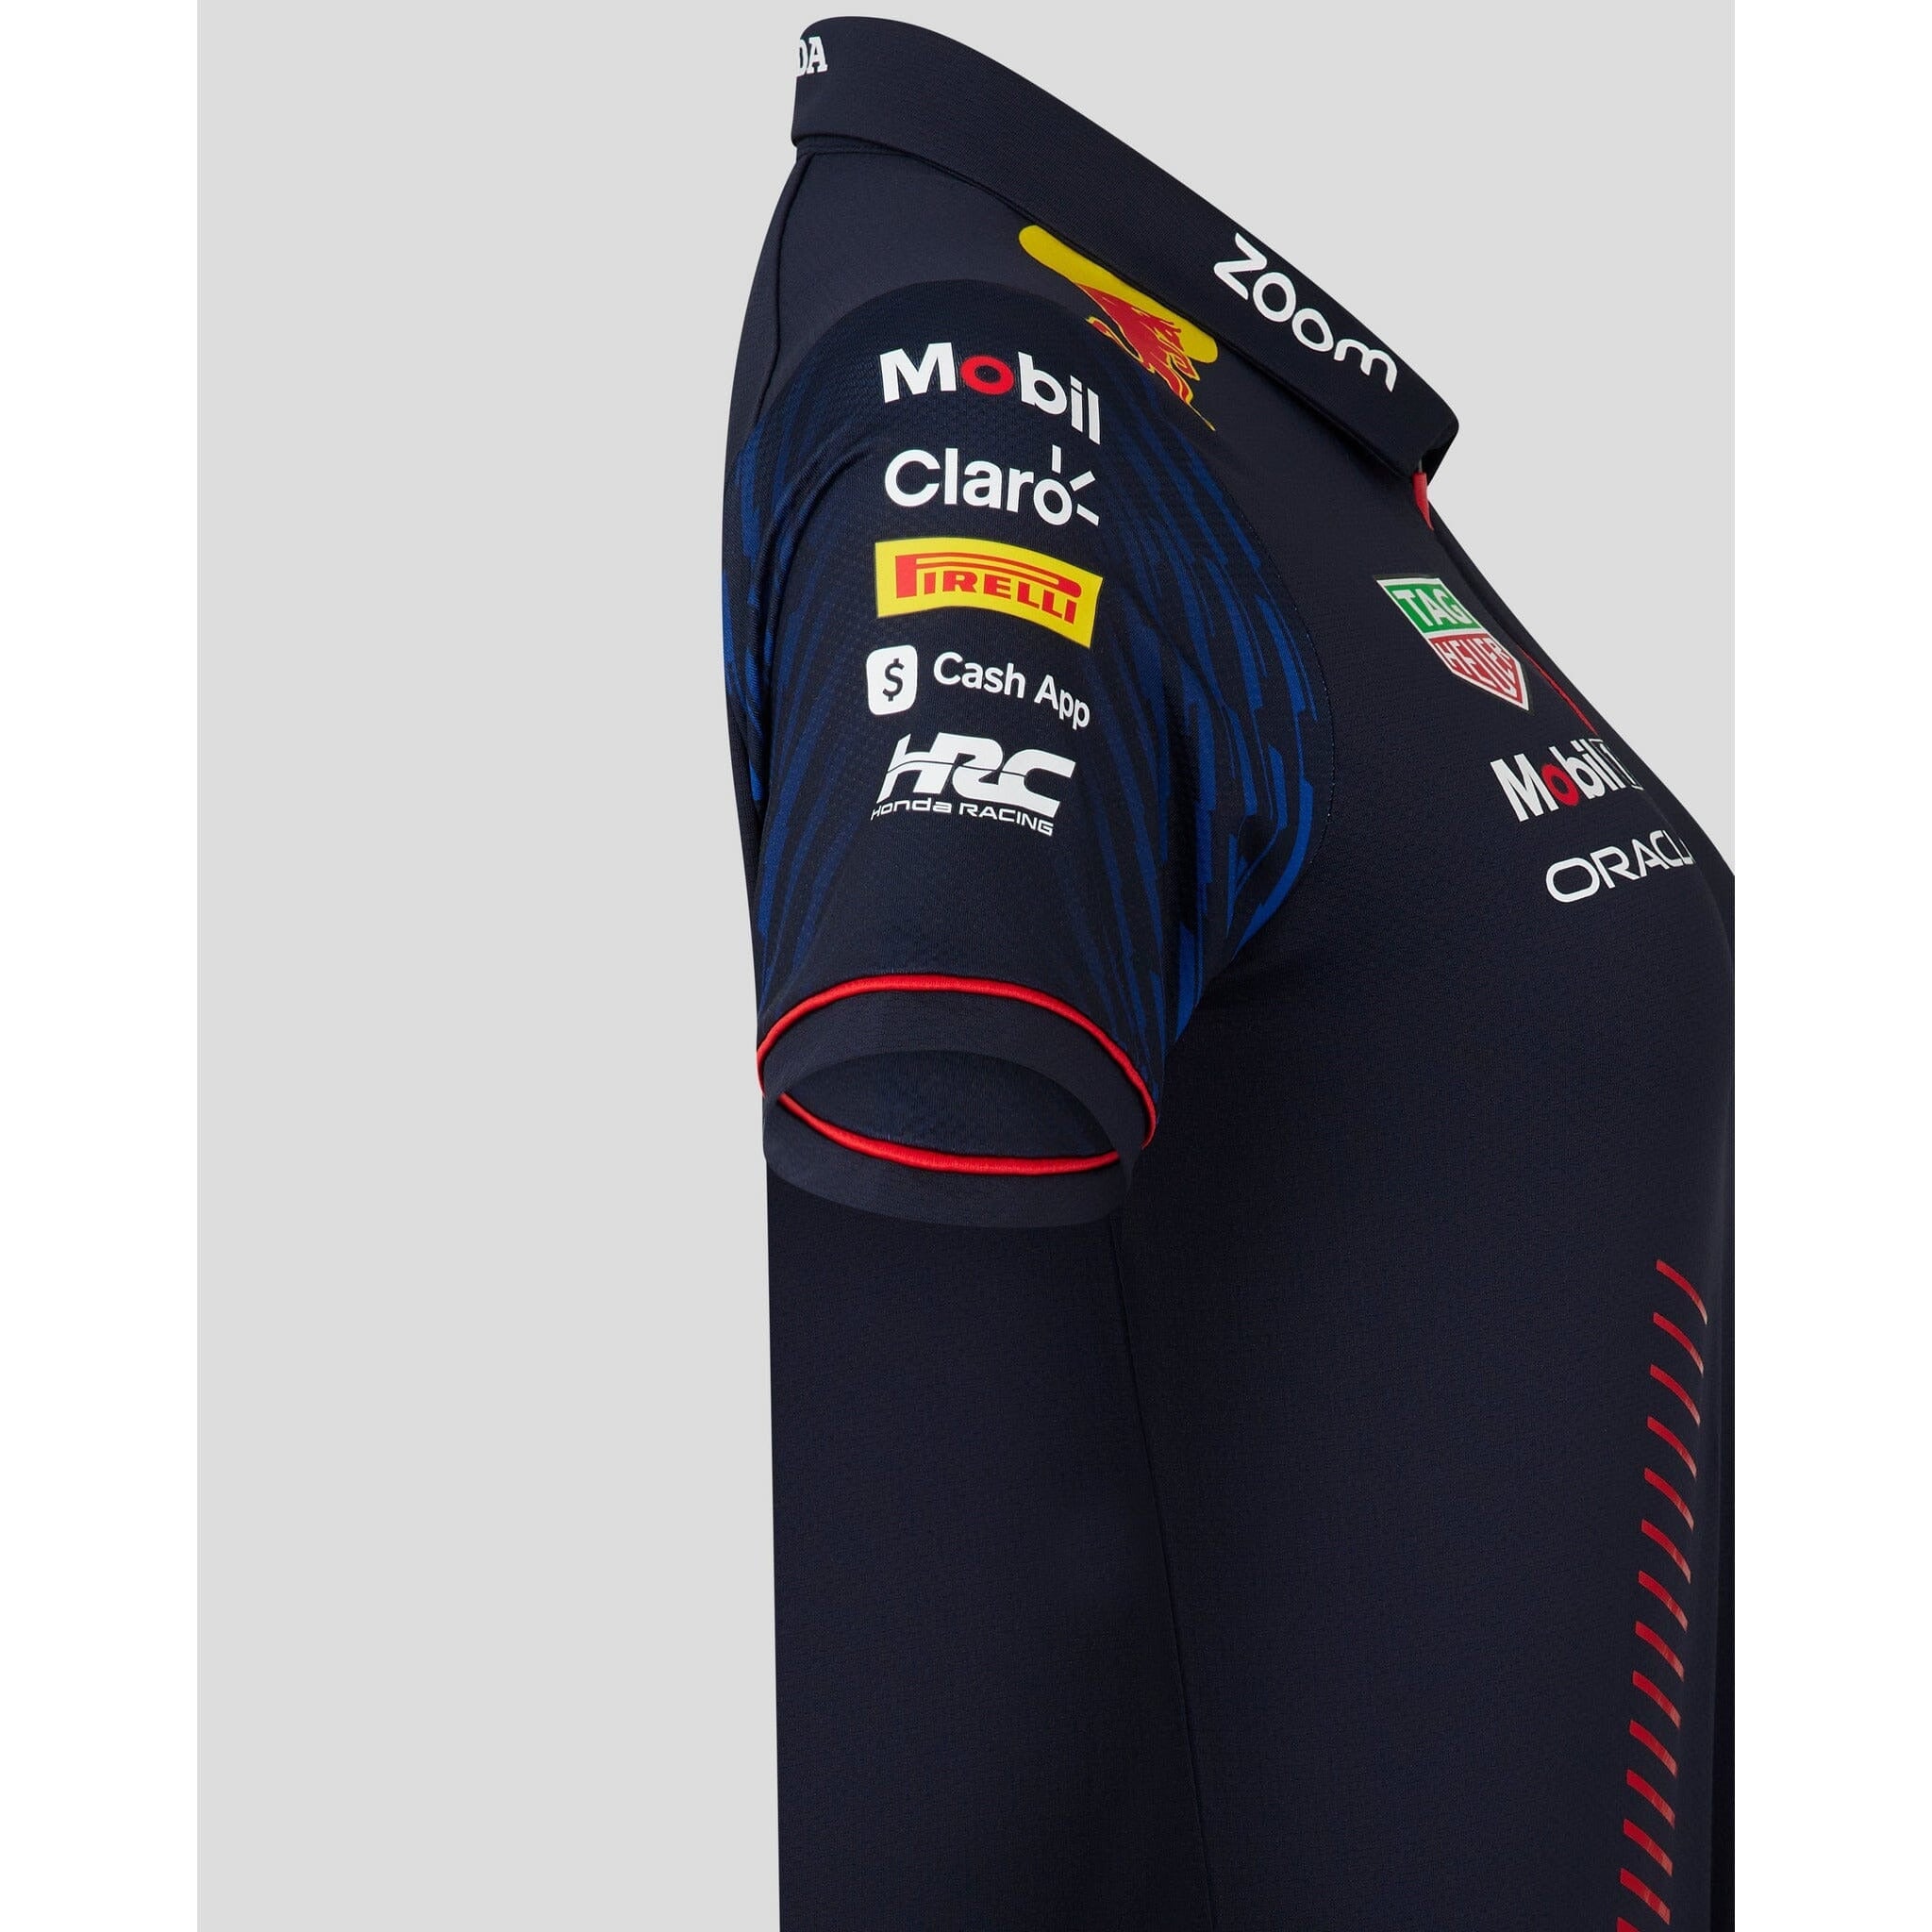 2022 Red Bull Racing Team Mens Polo